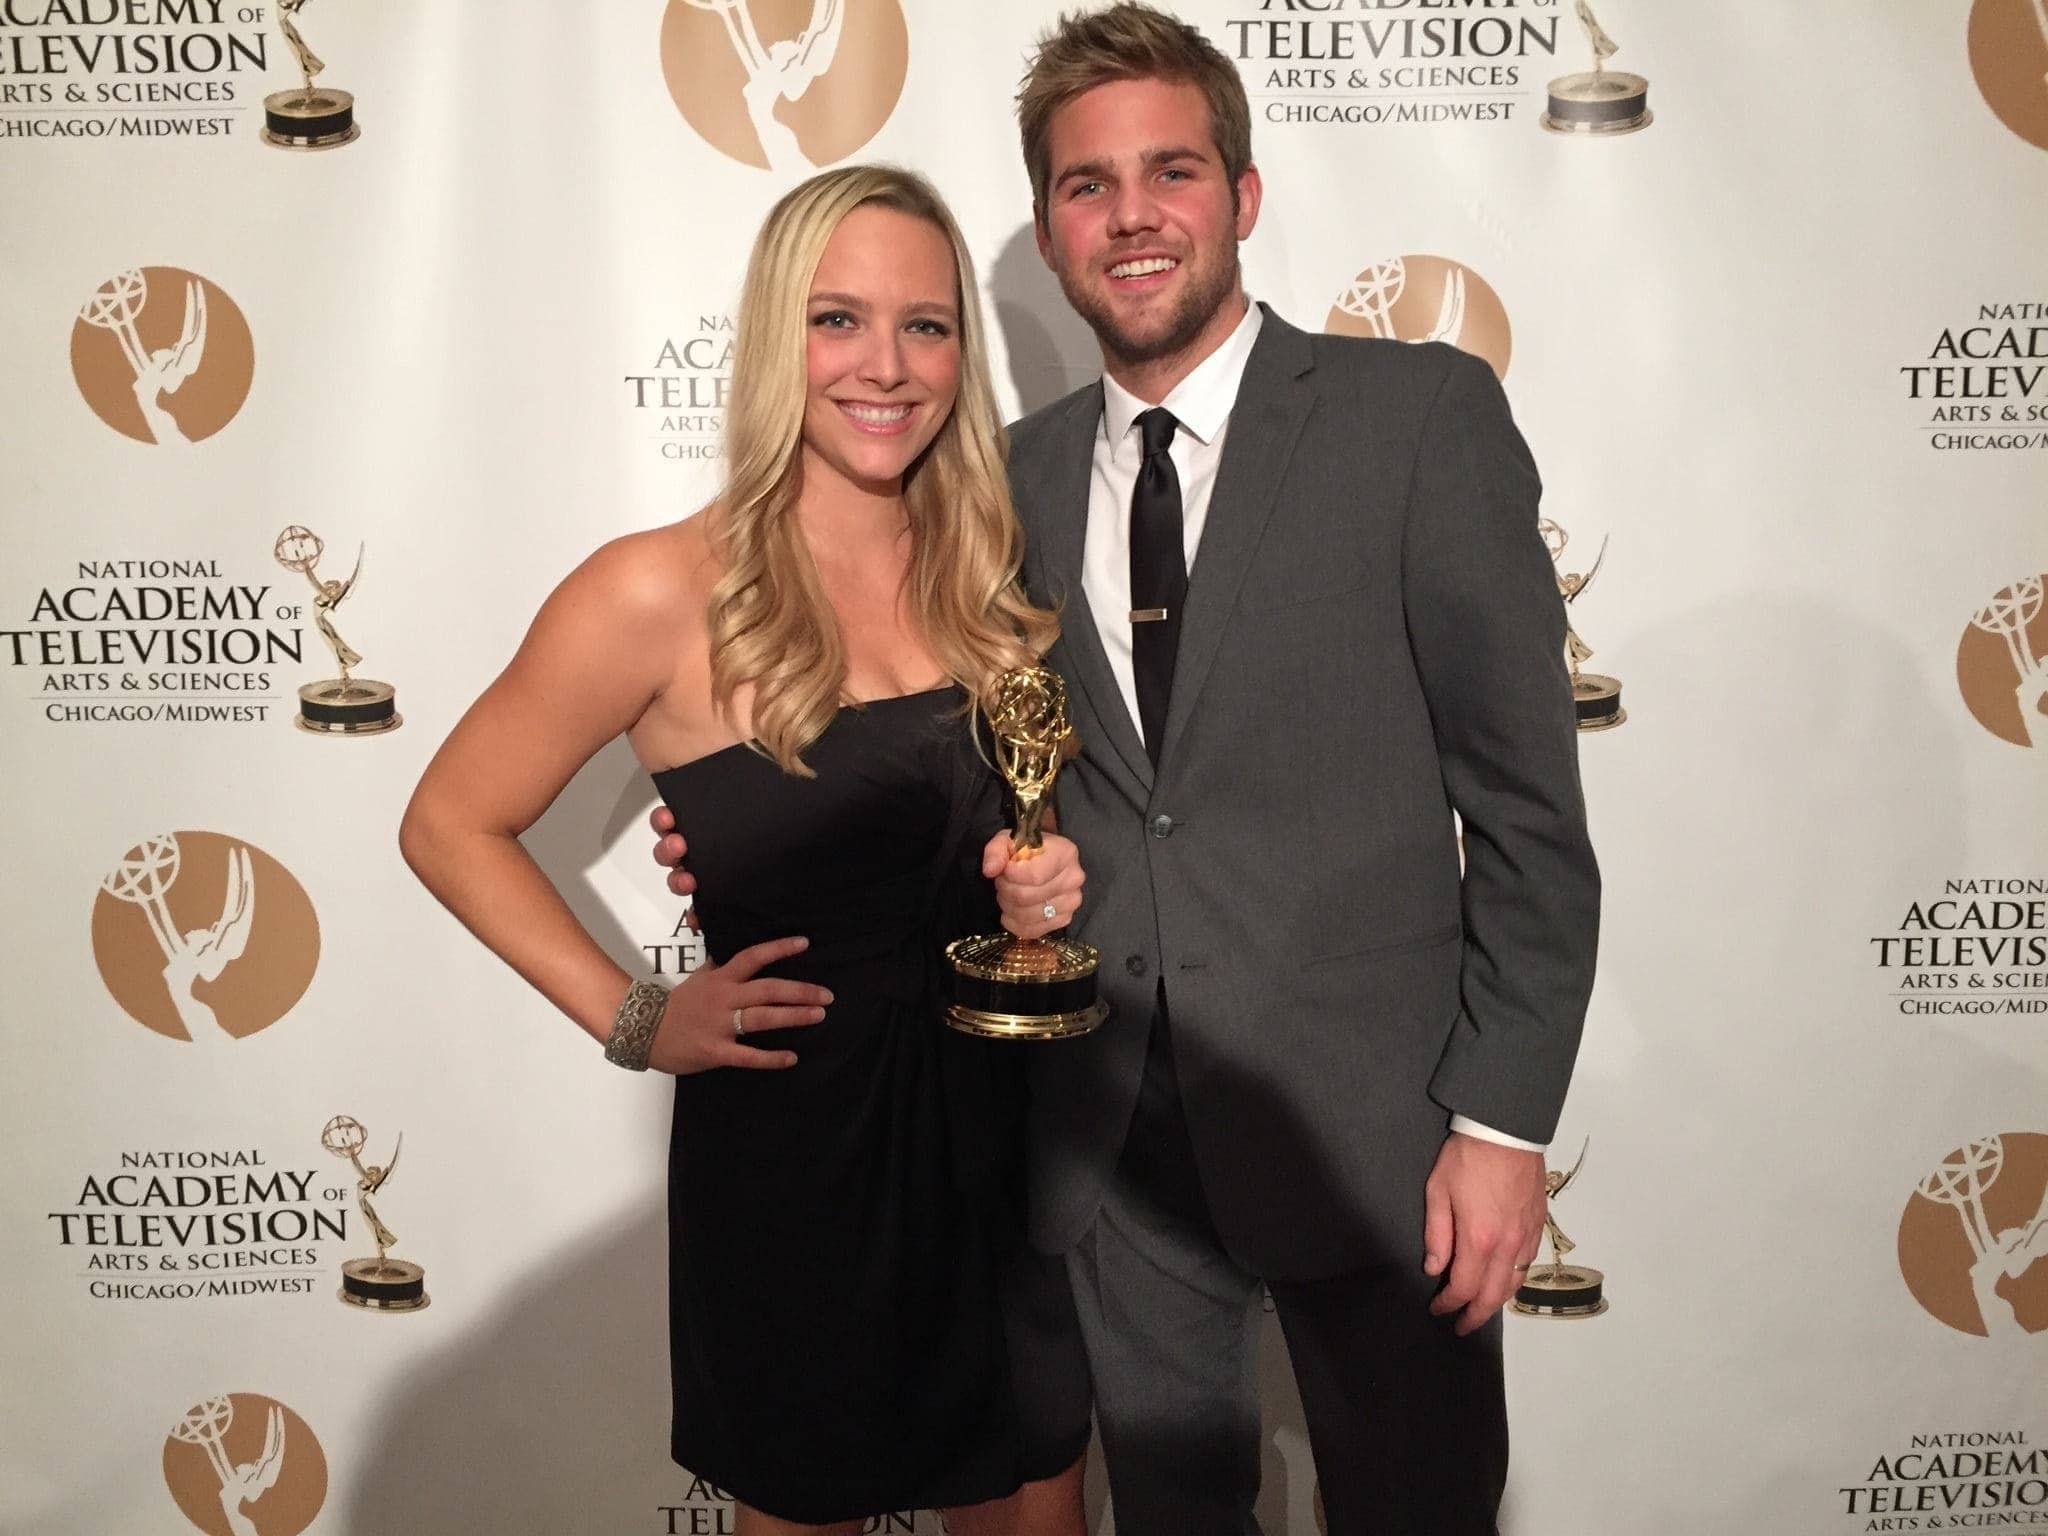 Winning an Emmy, my reporting career 